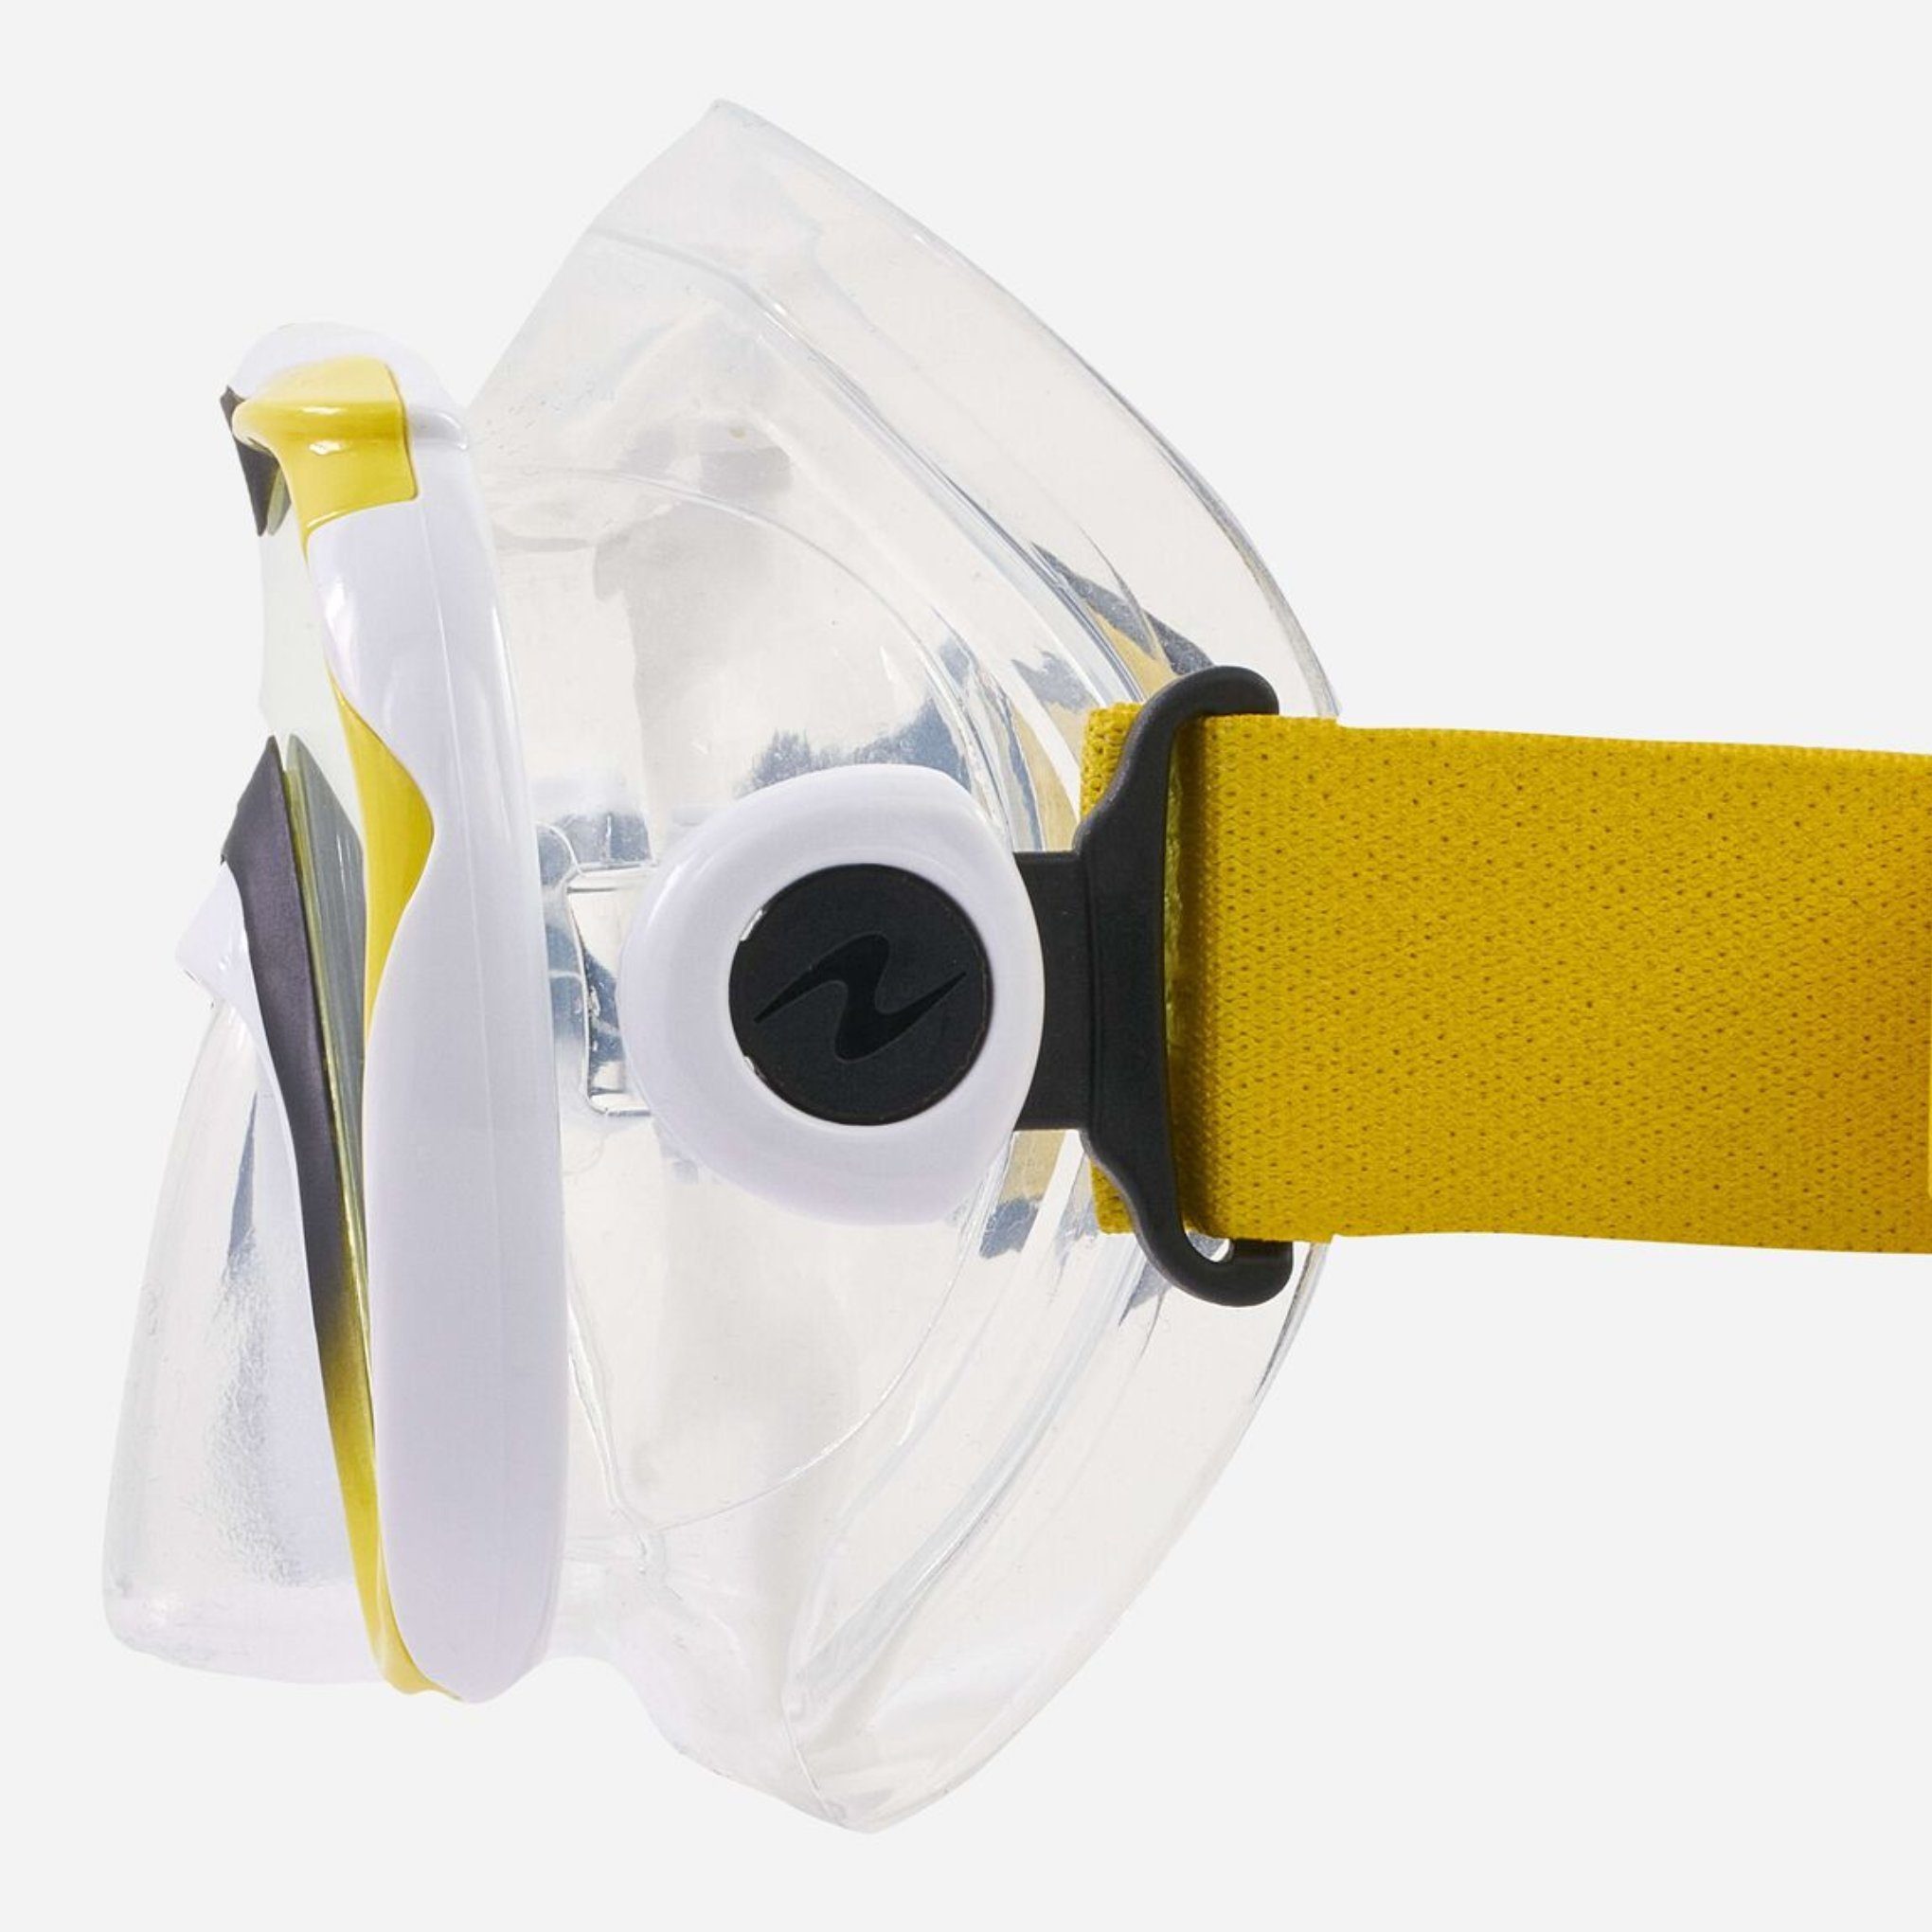 Aqualung Taucherbrille COMPASS YELLOW BLACK